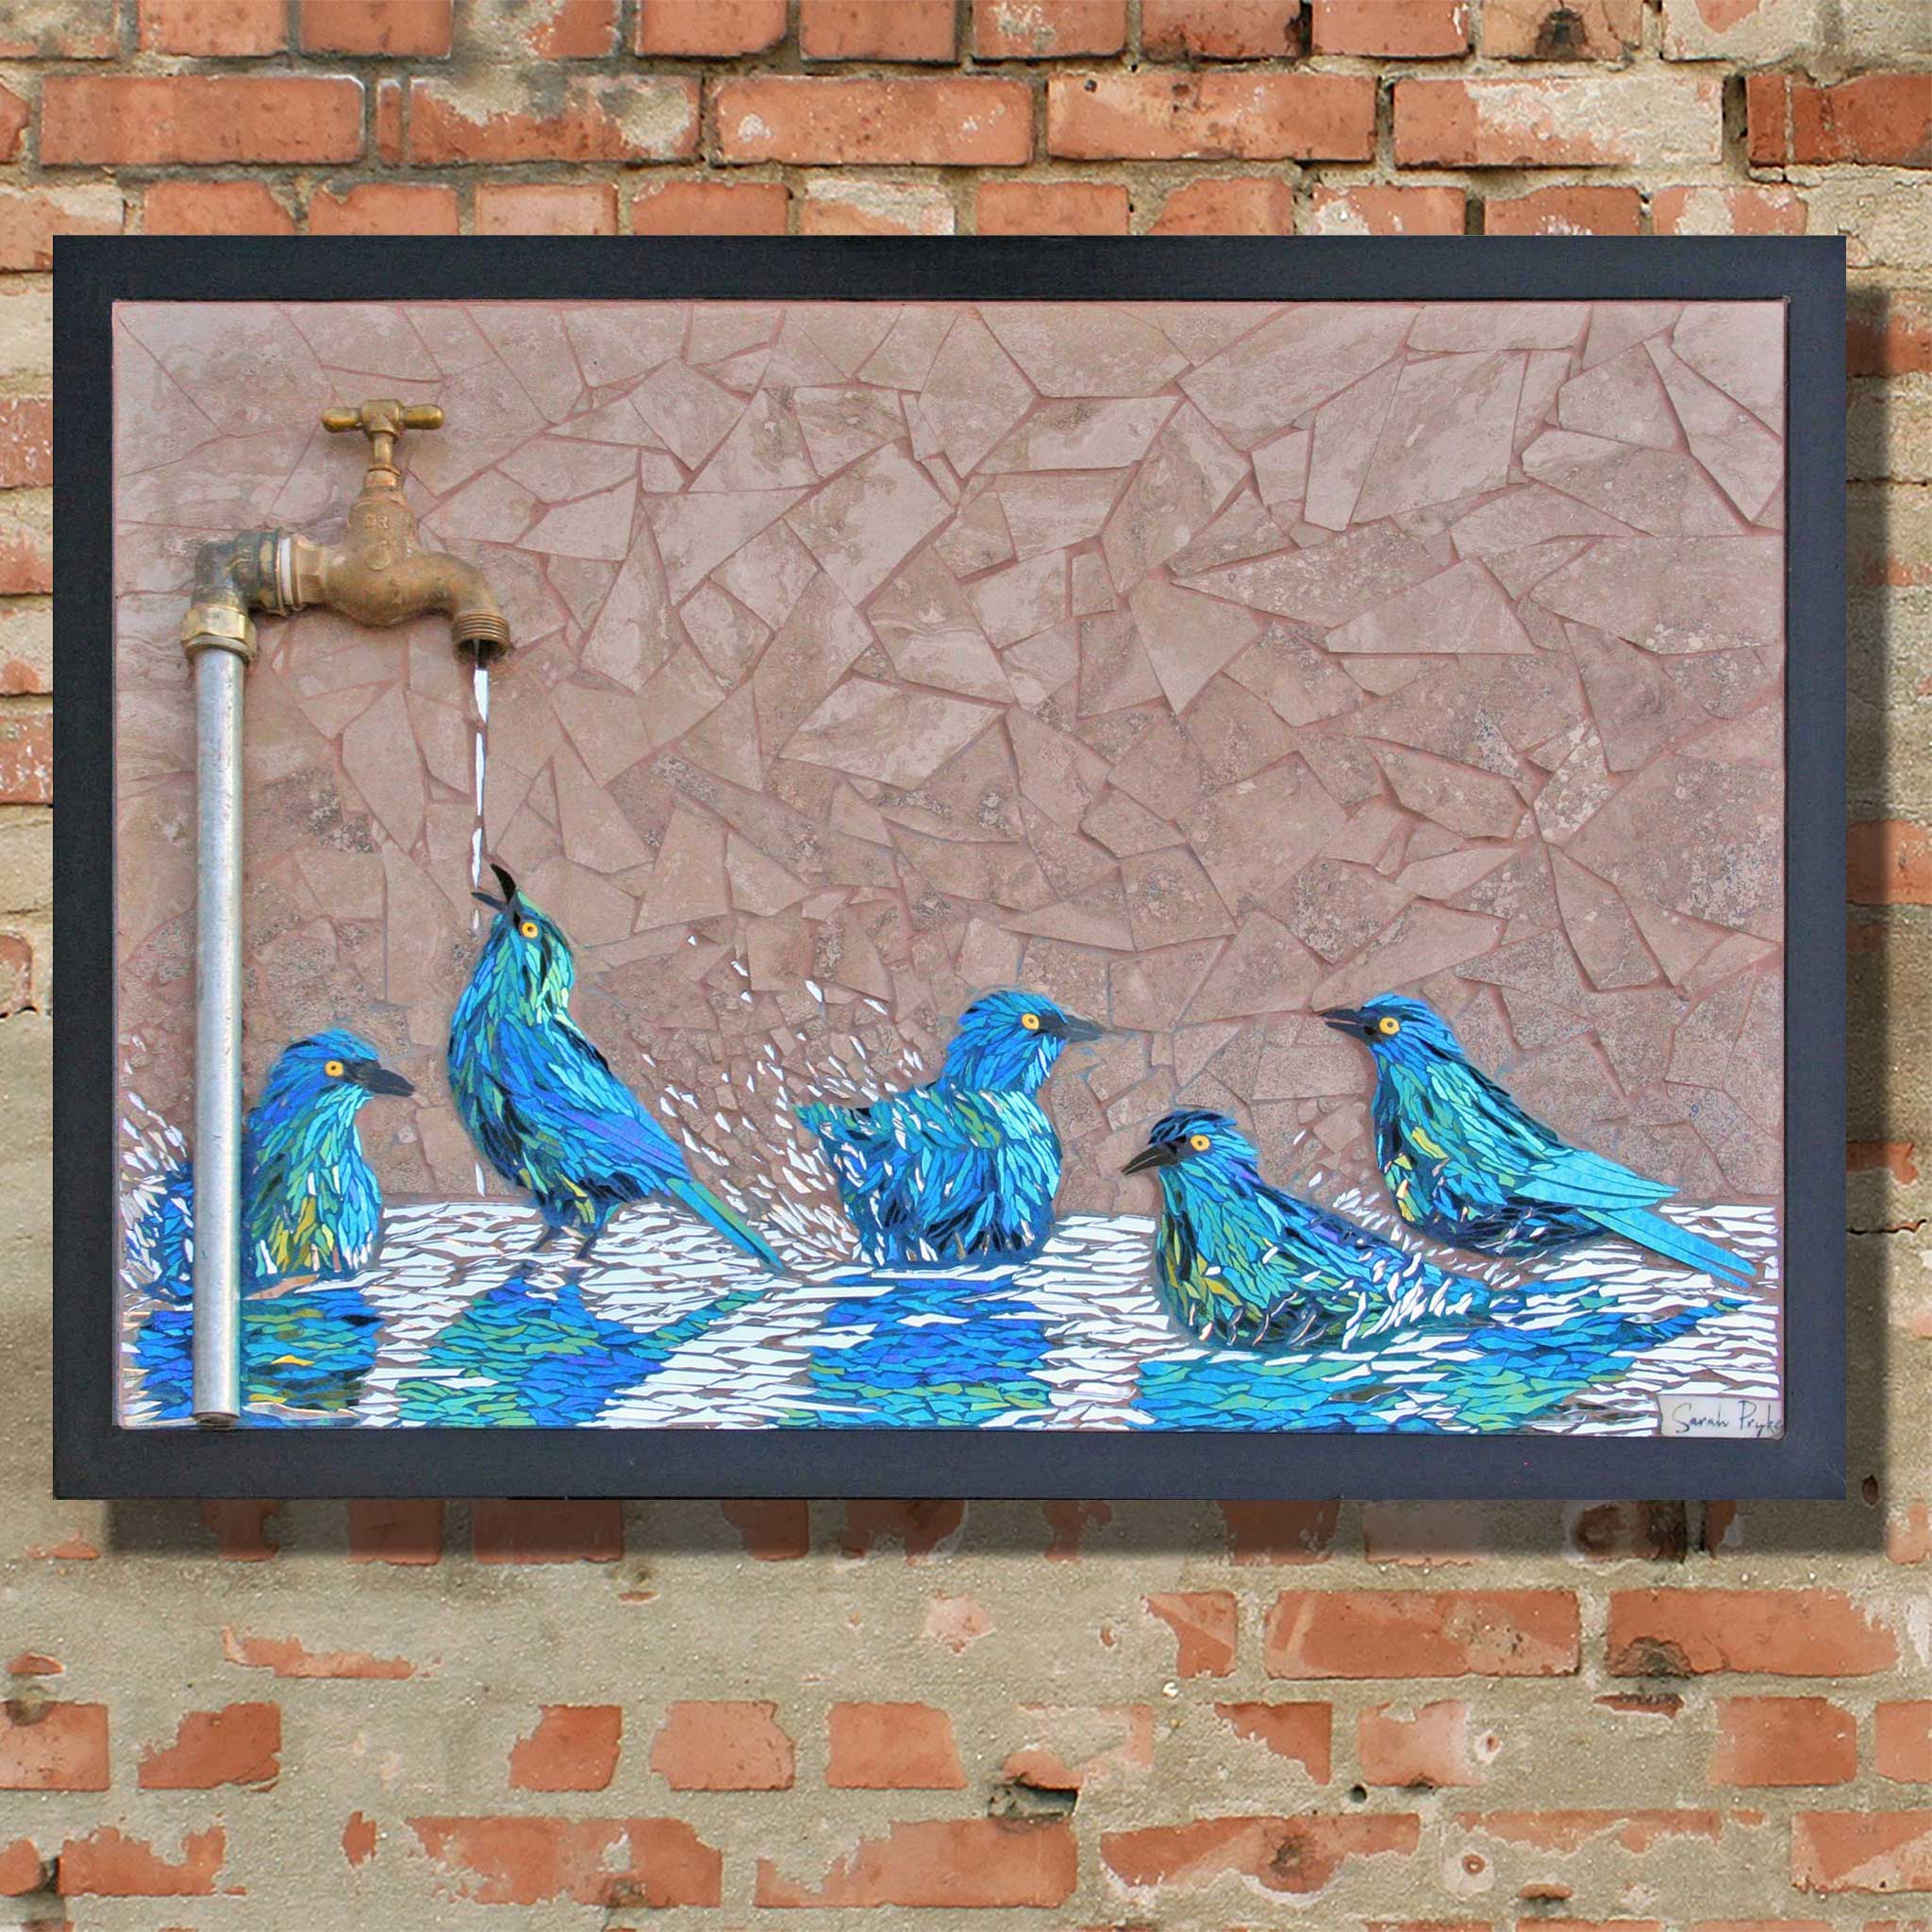 Title: “Starlings at Dripping Tap”<br/> 
Size: 60 x 90 cm<br/>
Price: SOLD (South Africa)<br/>  
Inspiration: A flock of Glossy Starlings having a bath under a dripping tap! These are one of my favourite bushveld birds, a common visitor to most picnics and such little characters! They love a vigorous bathing and saturating themselves in the water.